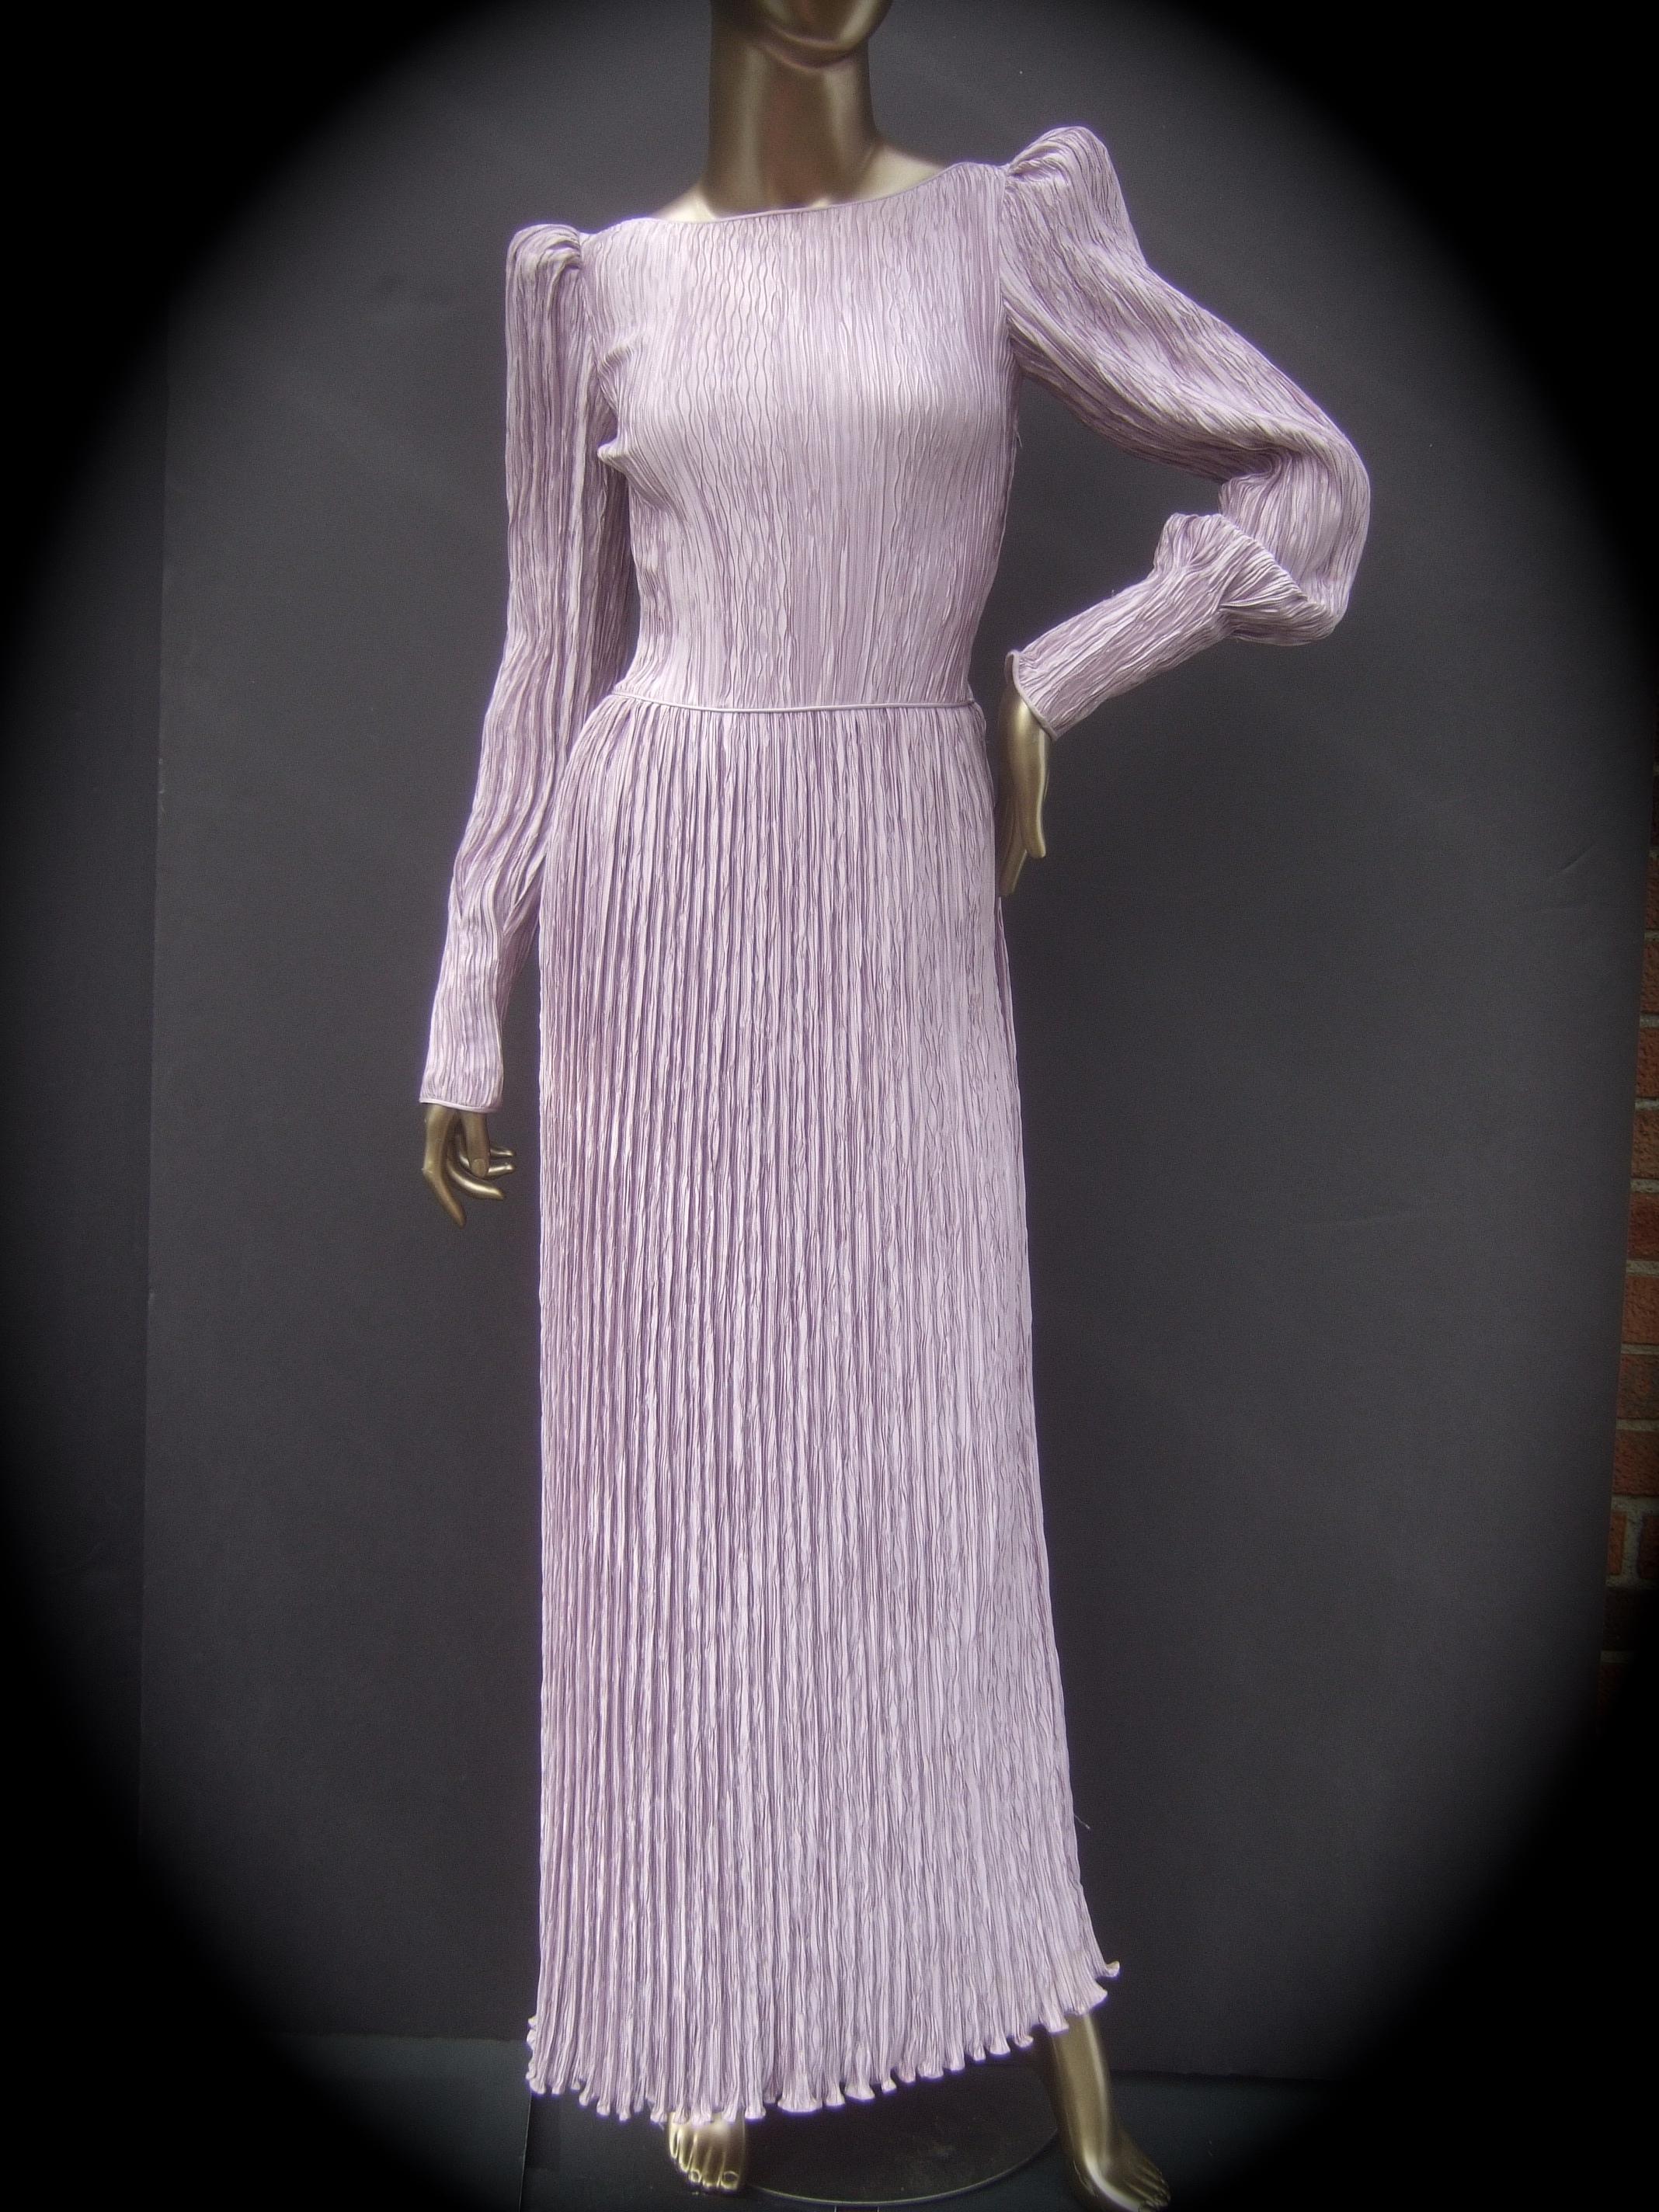 Mary McFadden Lavender pleated backless gown c 1990s
The exquisite pale lavender delphos pleated gown has a statuesque silhouette. The Fortuny 